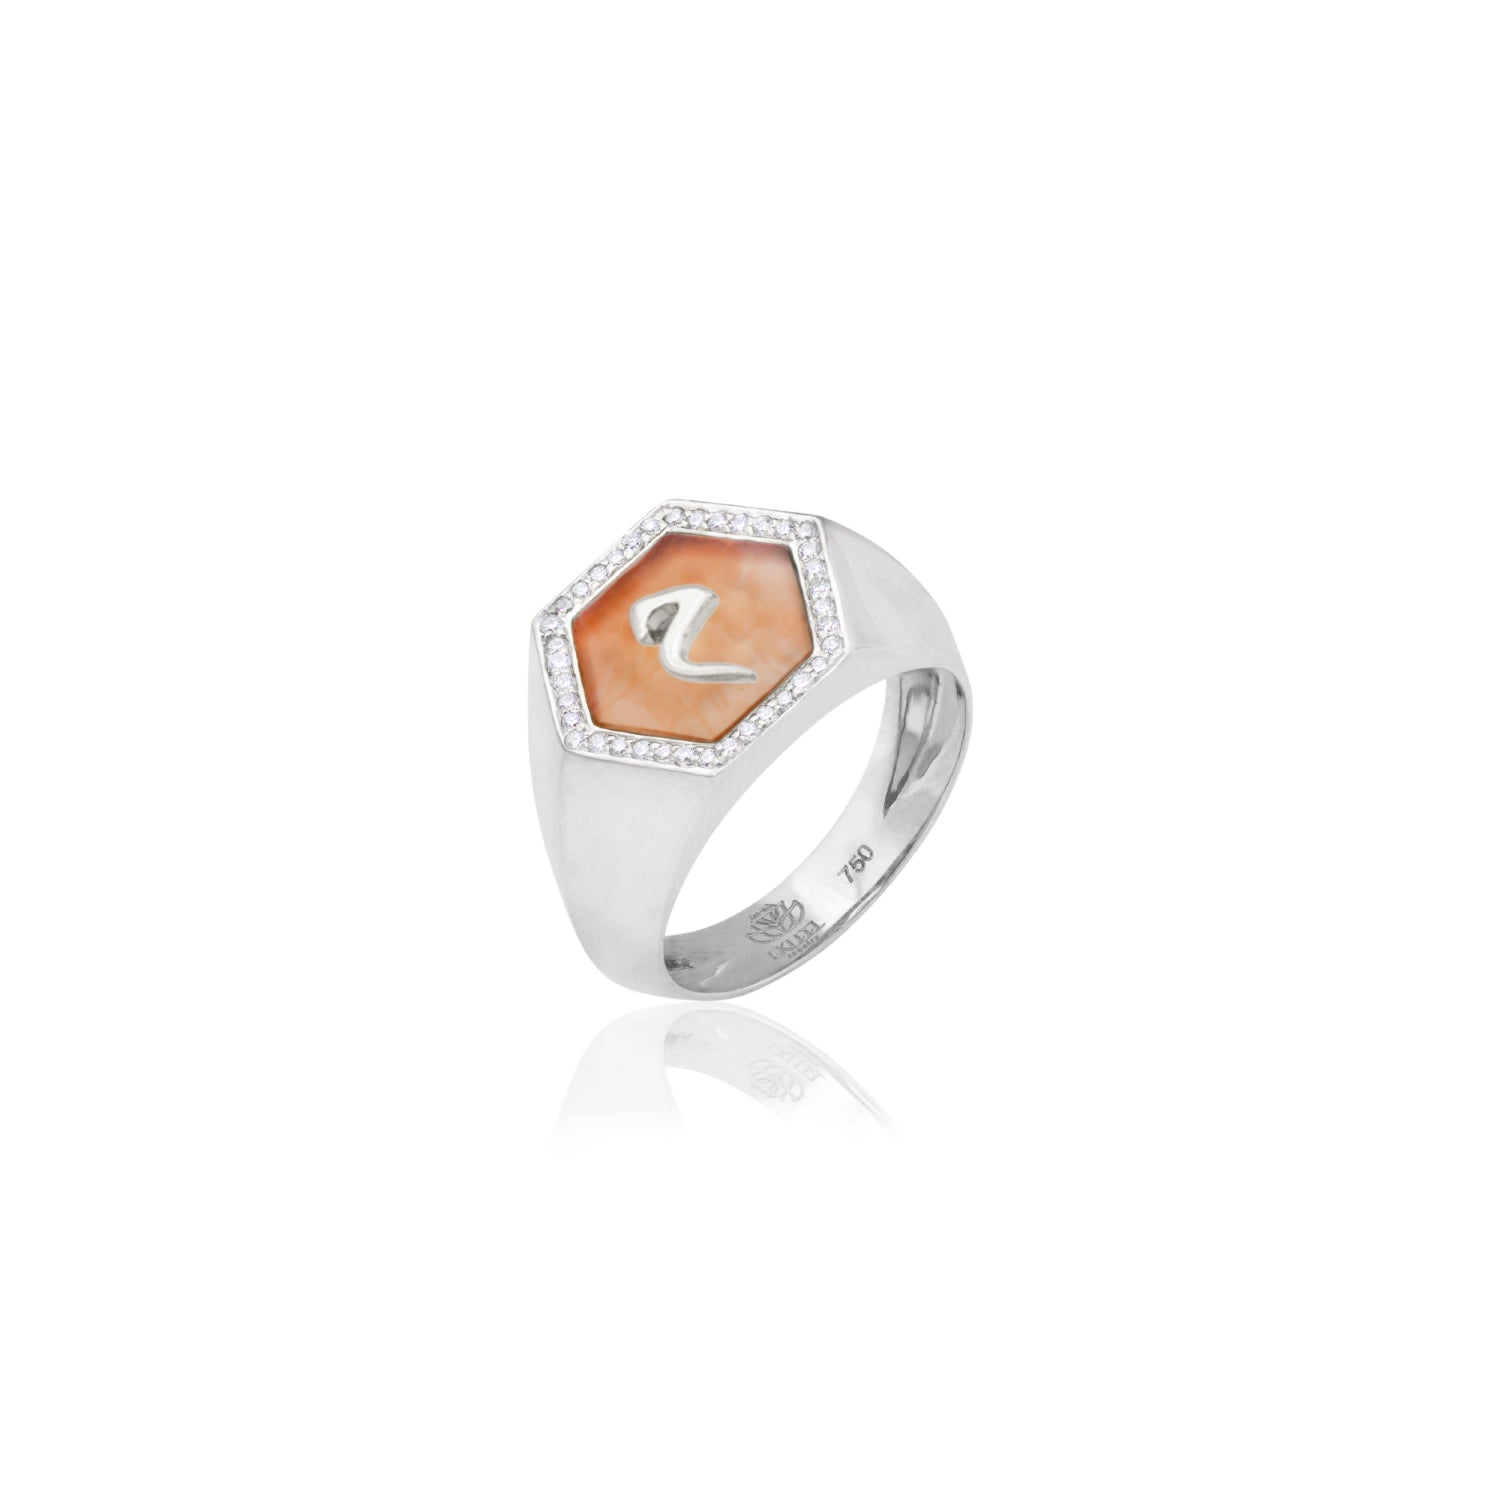 Qamoos 2.0 Letter م Carnelian and Diamond Signet Ring in White Gold